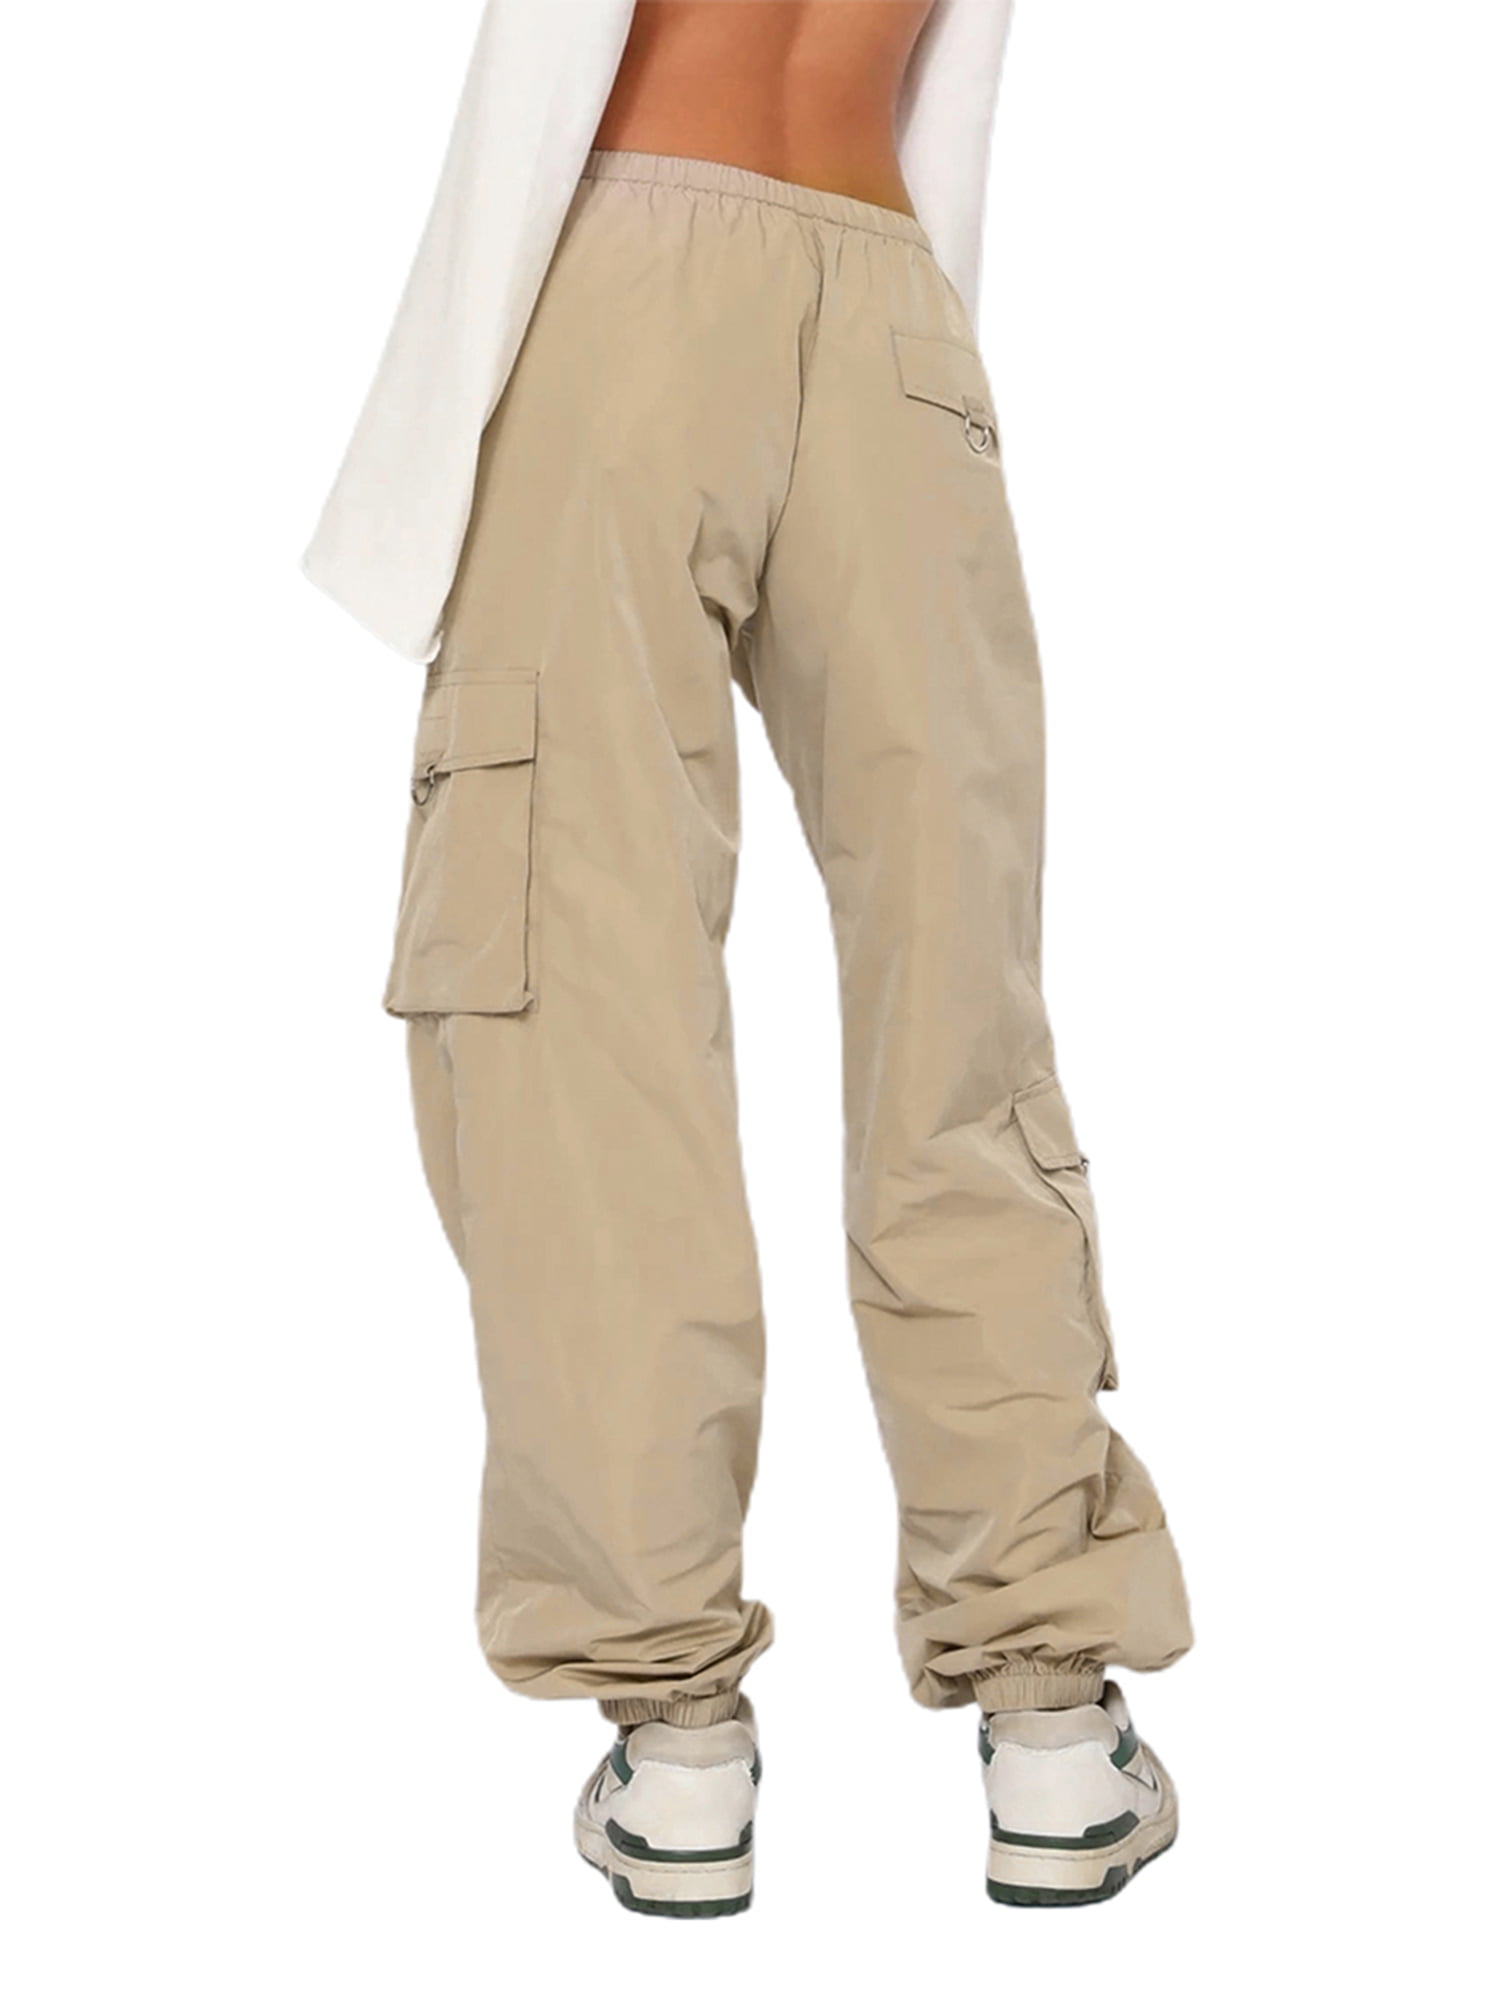 SS即完SEE SEE BAGGY CHINO BEIGE Lサイズ   ワークパンツ/カーゴ